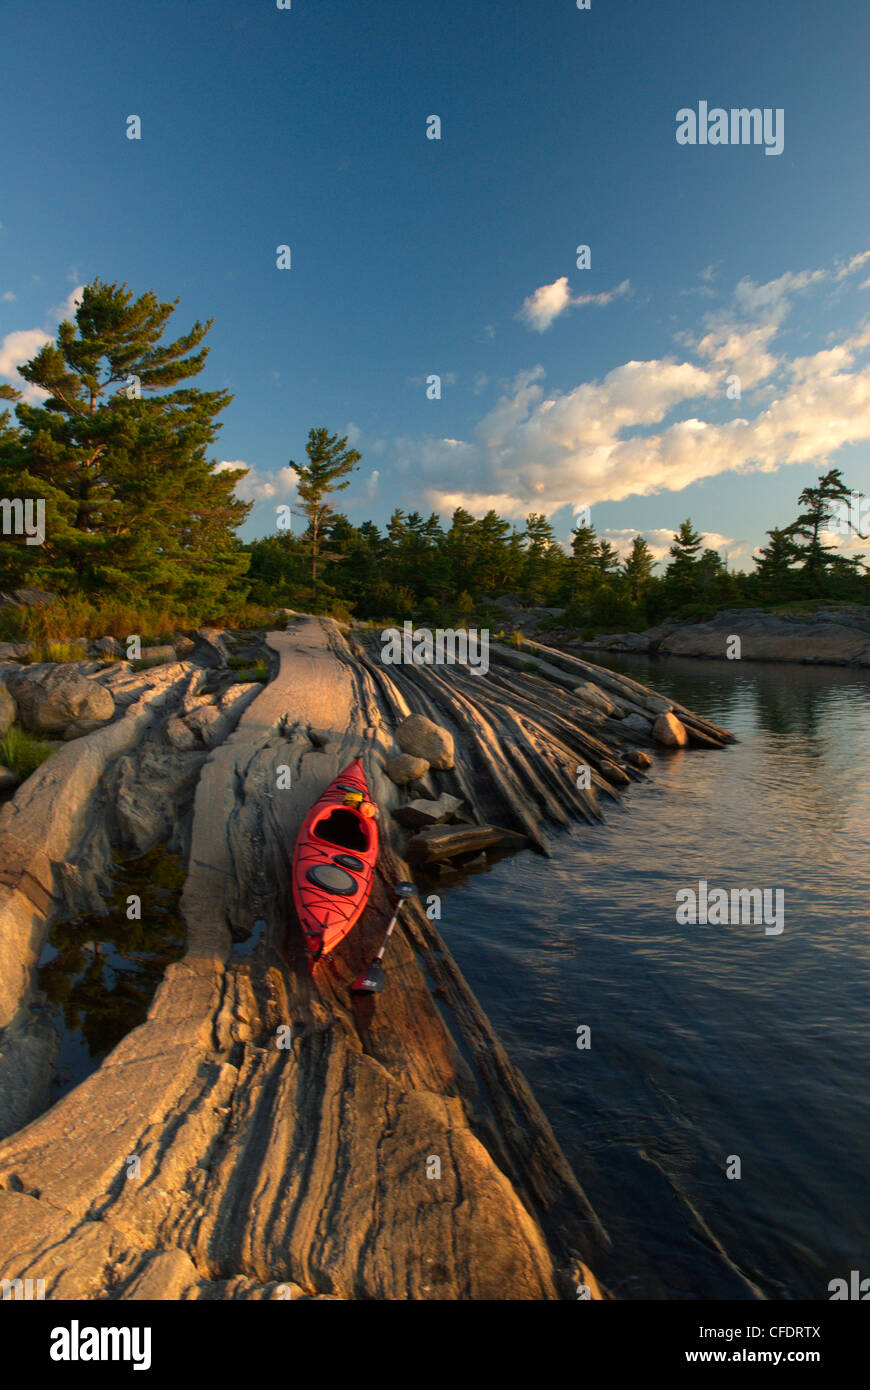 Snug Harbour, Franklin Island, Parry Sound, Geogian Bay, Lake Huron, Canadian Shield, Ontario, Canada Stock Photo